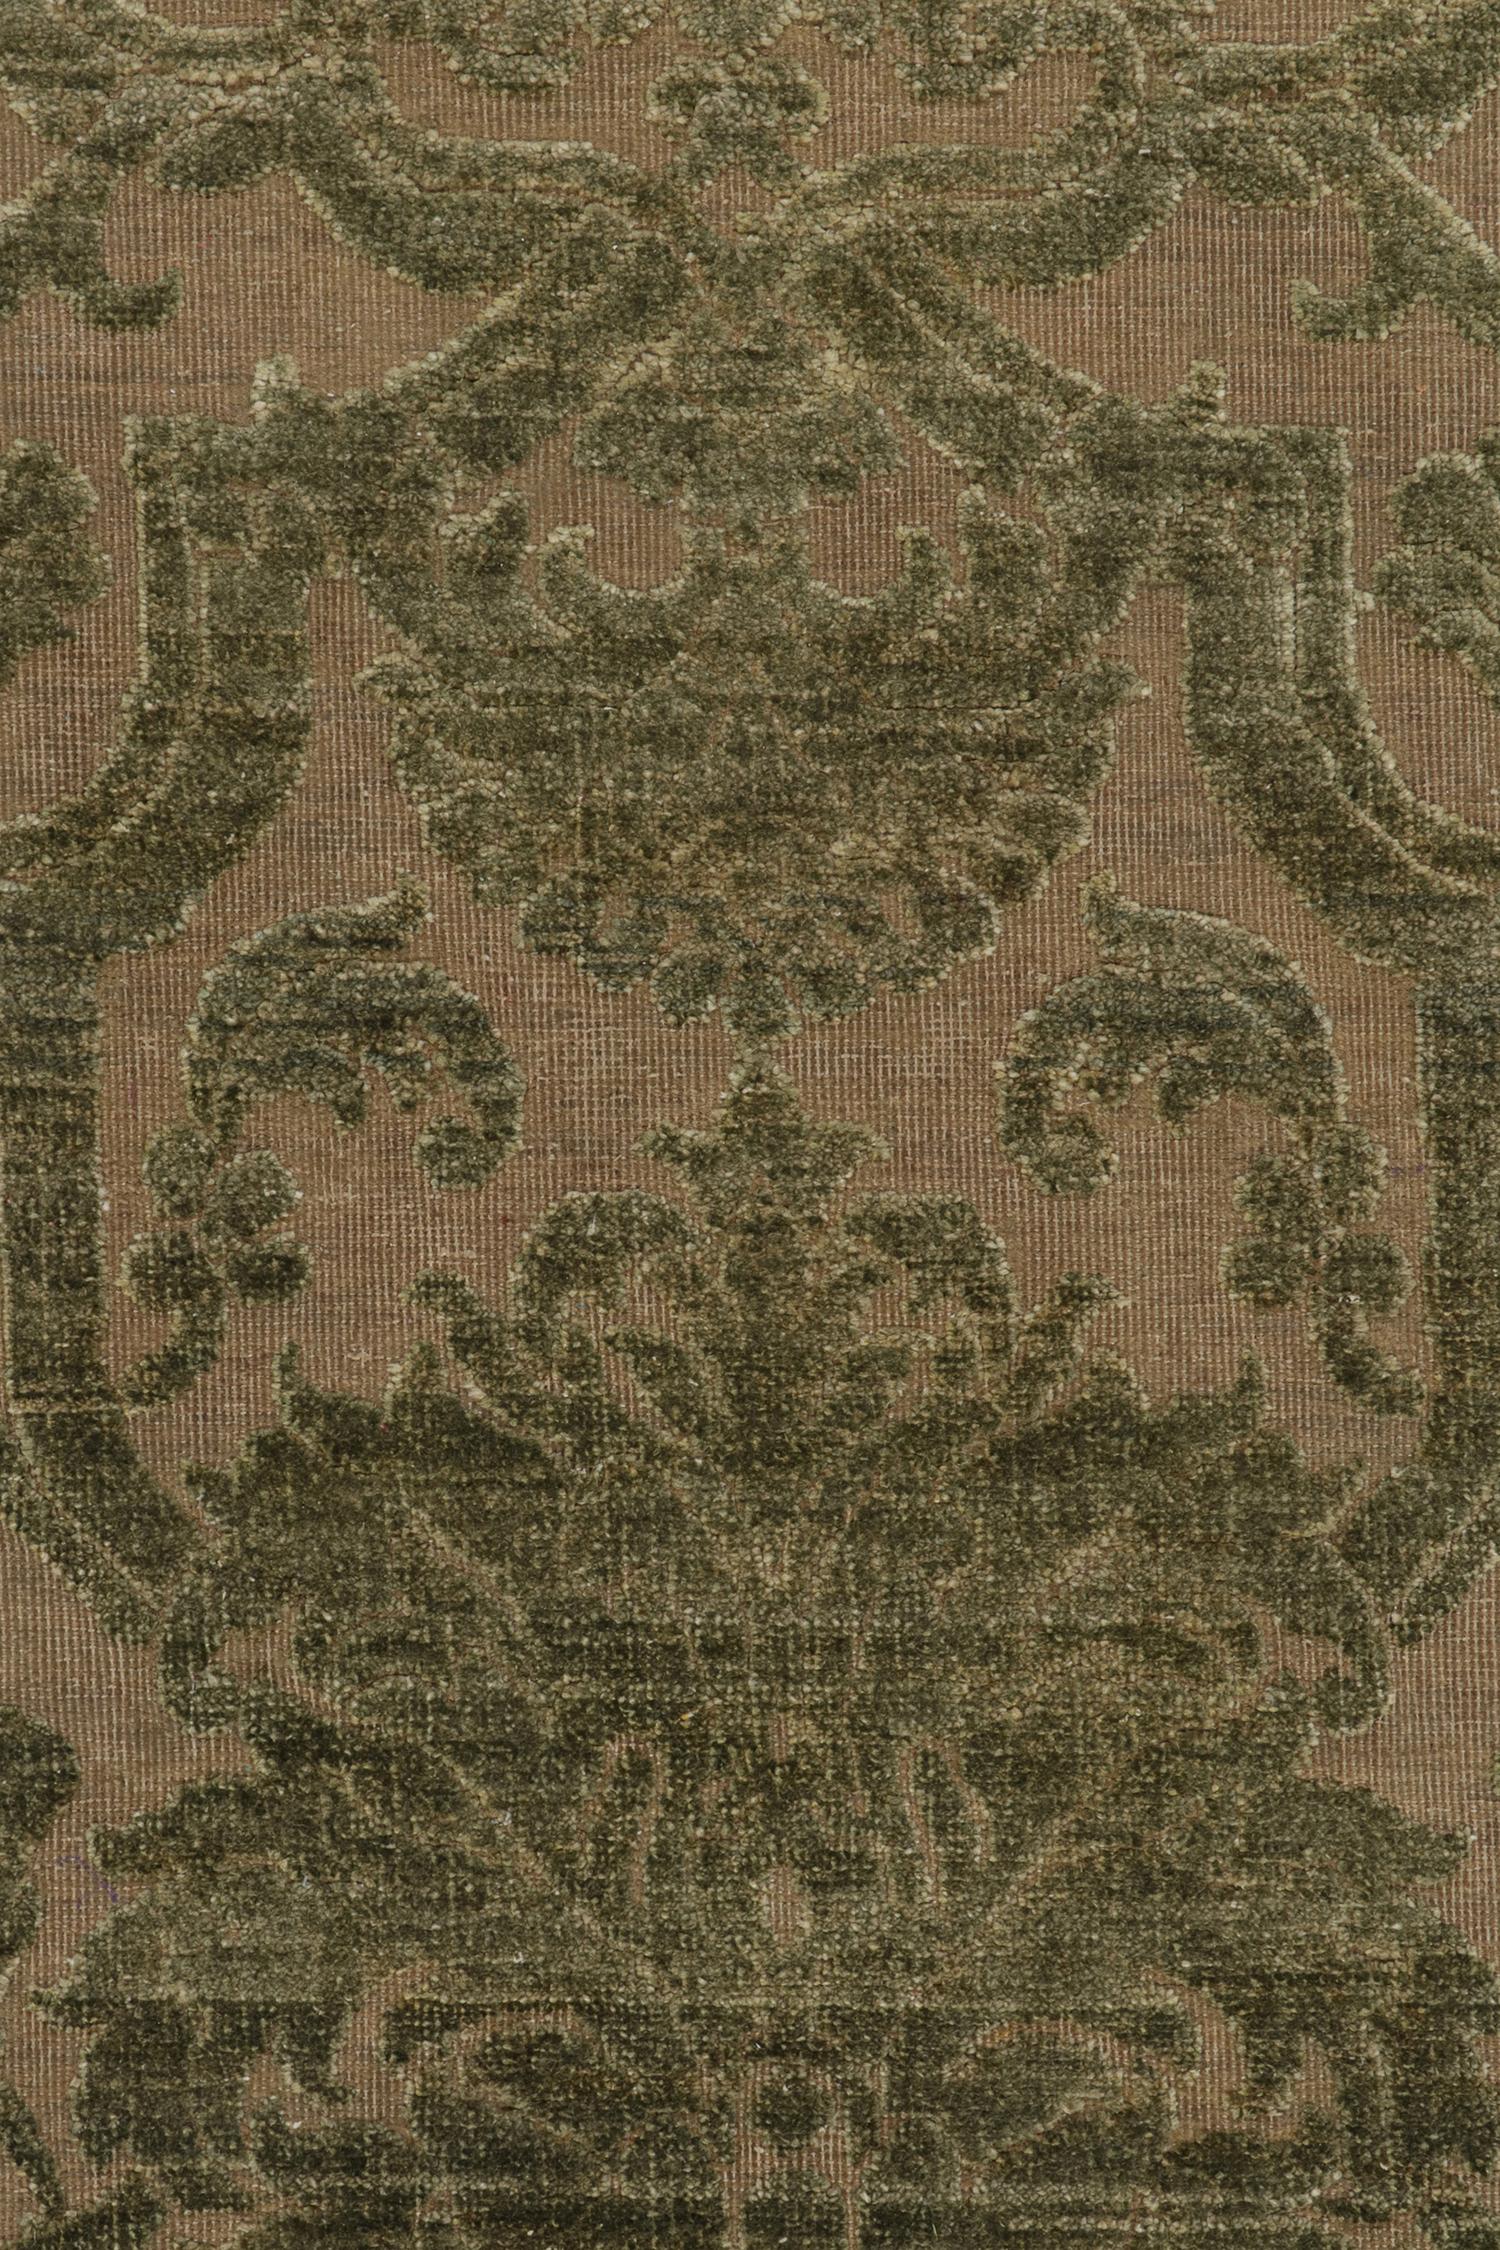 Contemporary Rug & Kilim’s European Style Runner in Beige with Green Floral Patterns For Sale